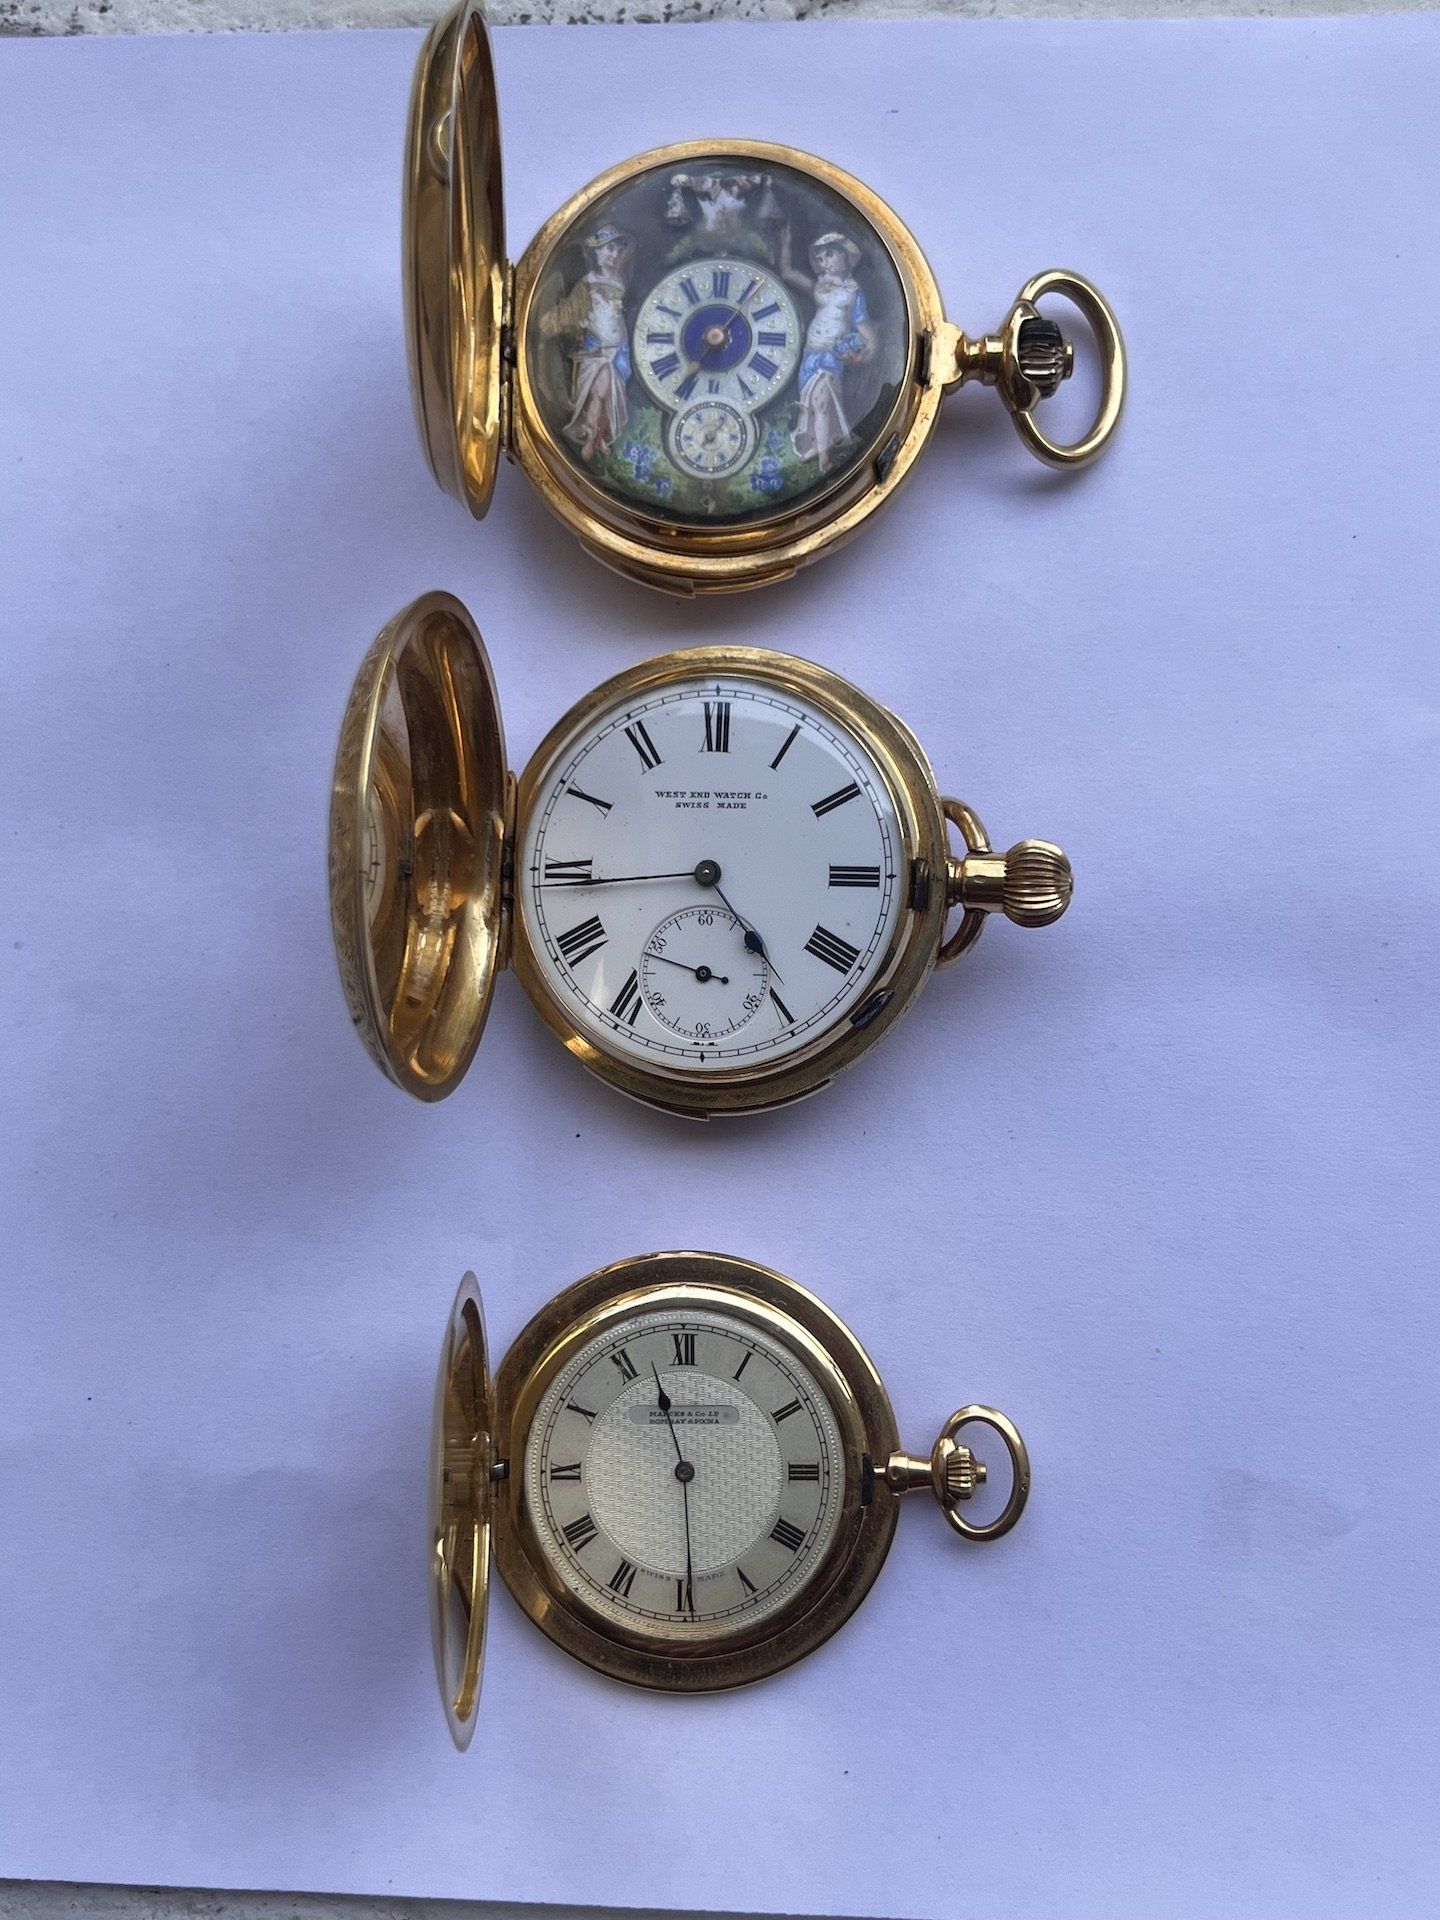 Pocket watch by West End Watch Co., 1850